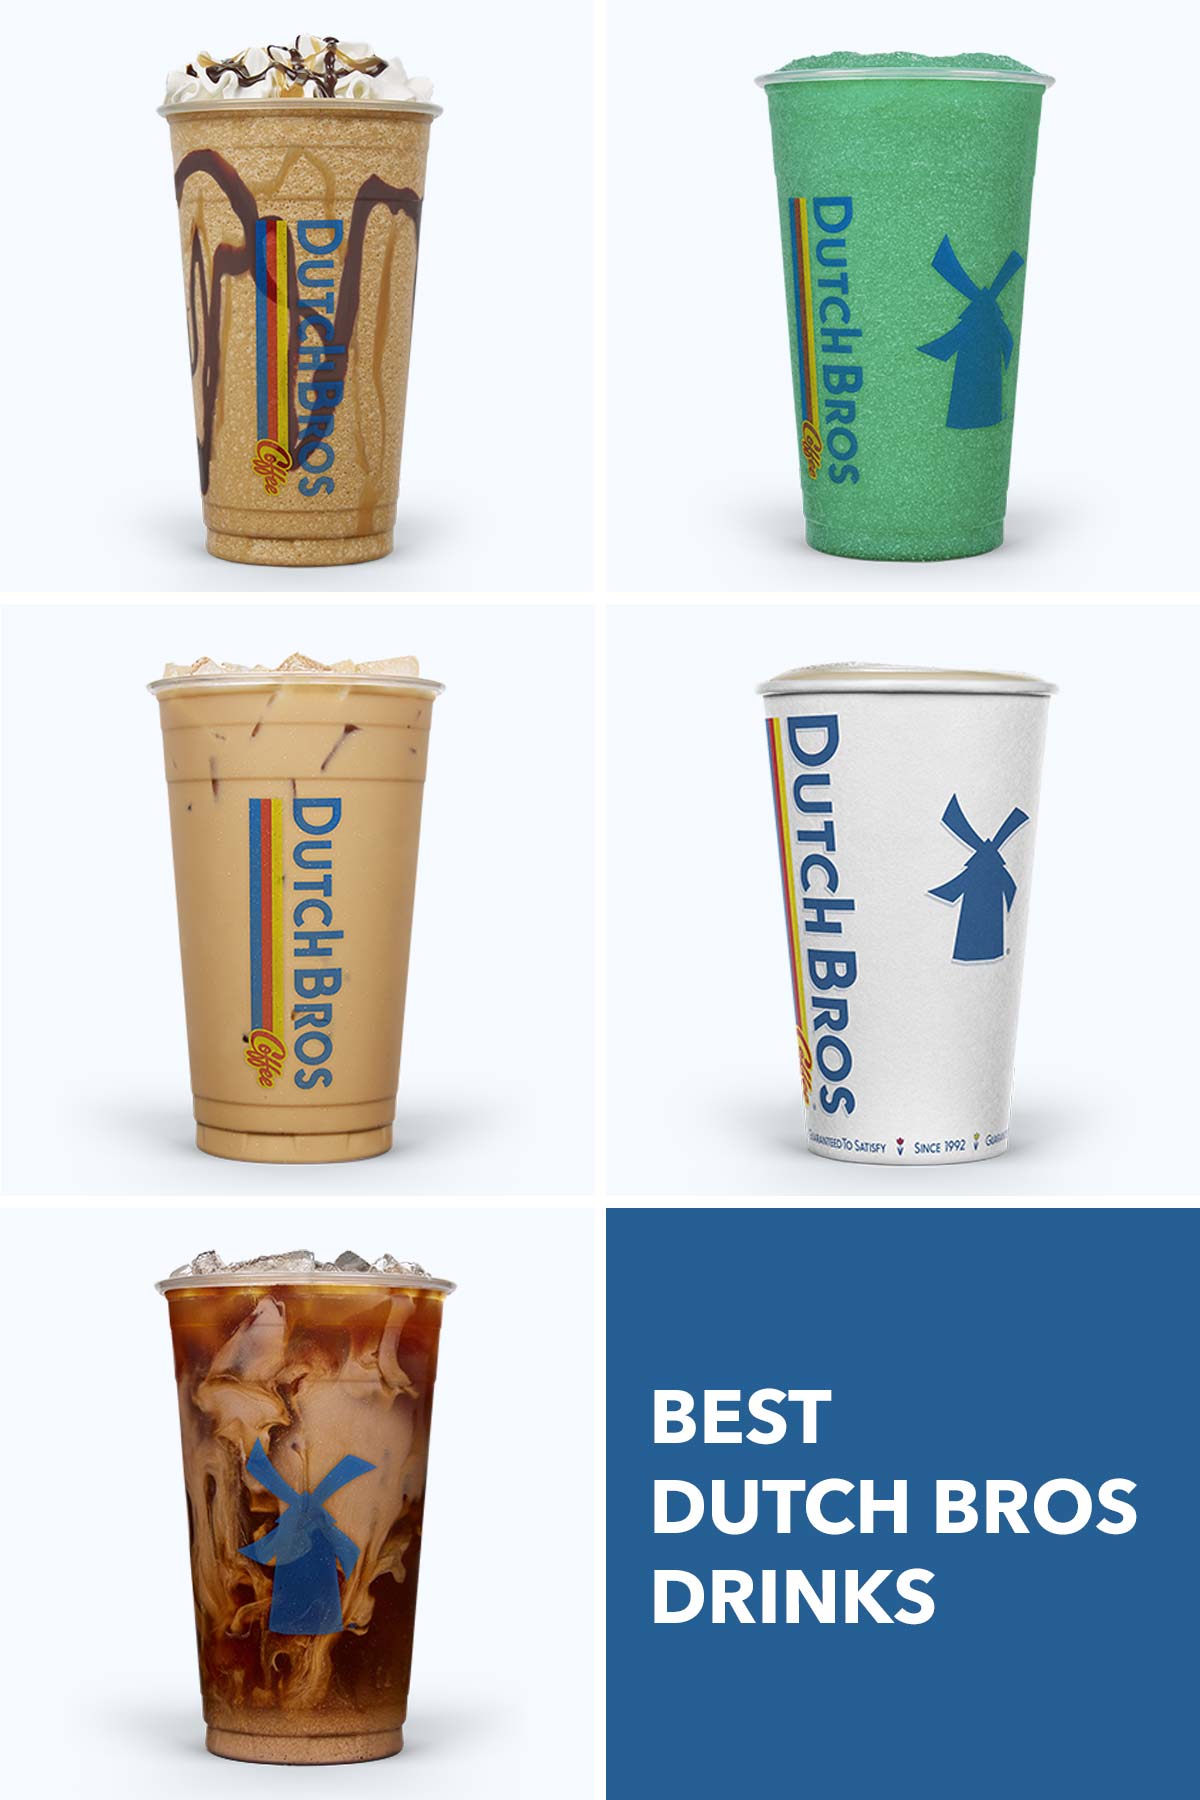 Photo collage showing 5 different Dutch Bros drinks.